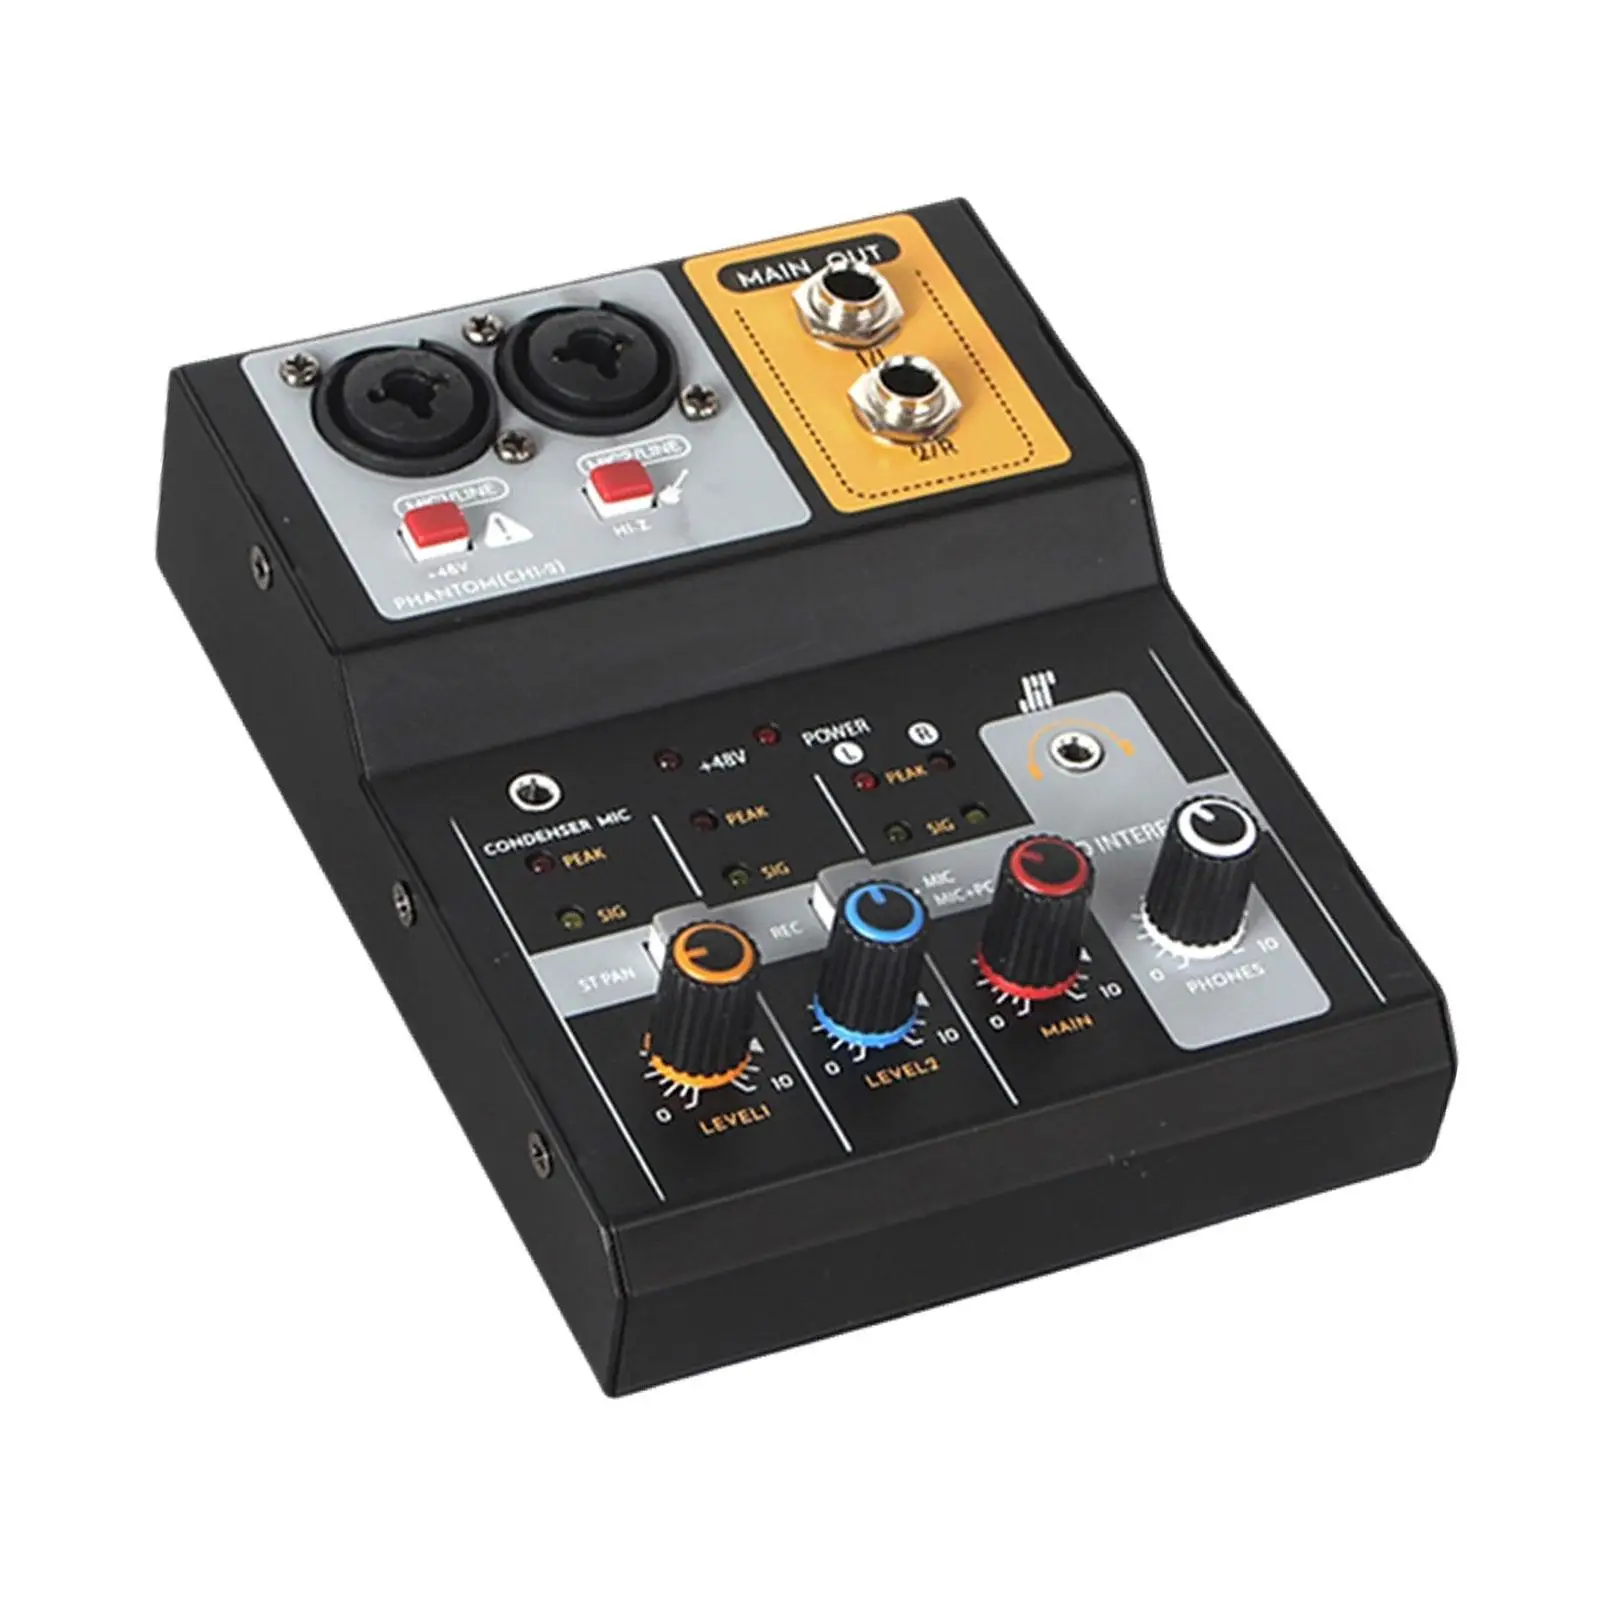 Audio Mixer Controller Universal Interfaces Less Interference USB 2 Channel for Stereo Recording KTV Studio Show Live Broadcast